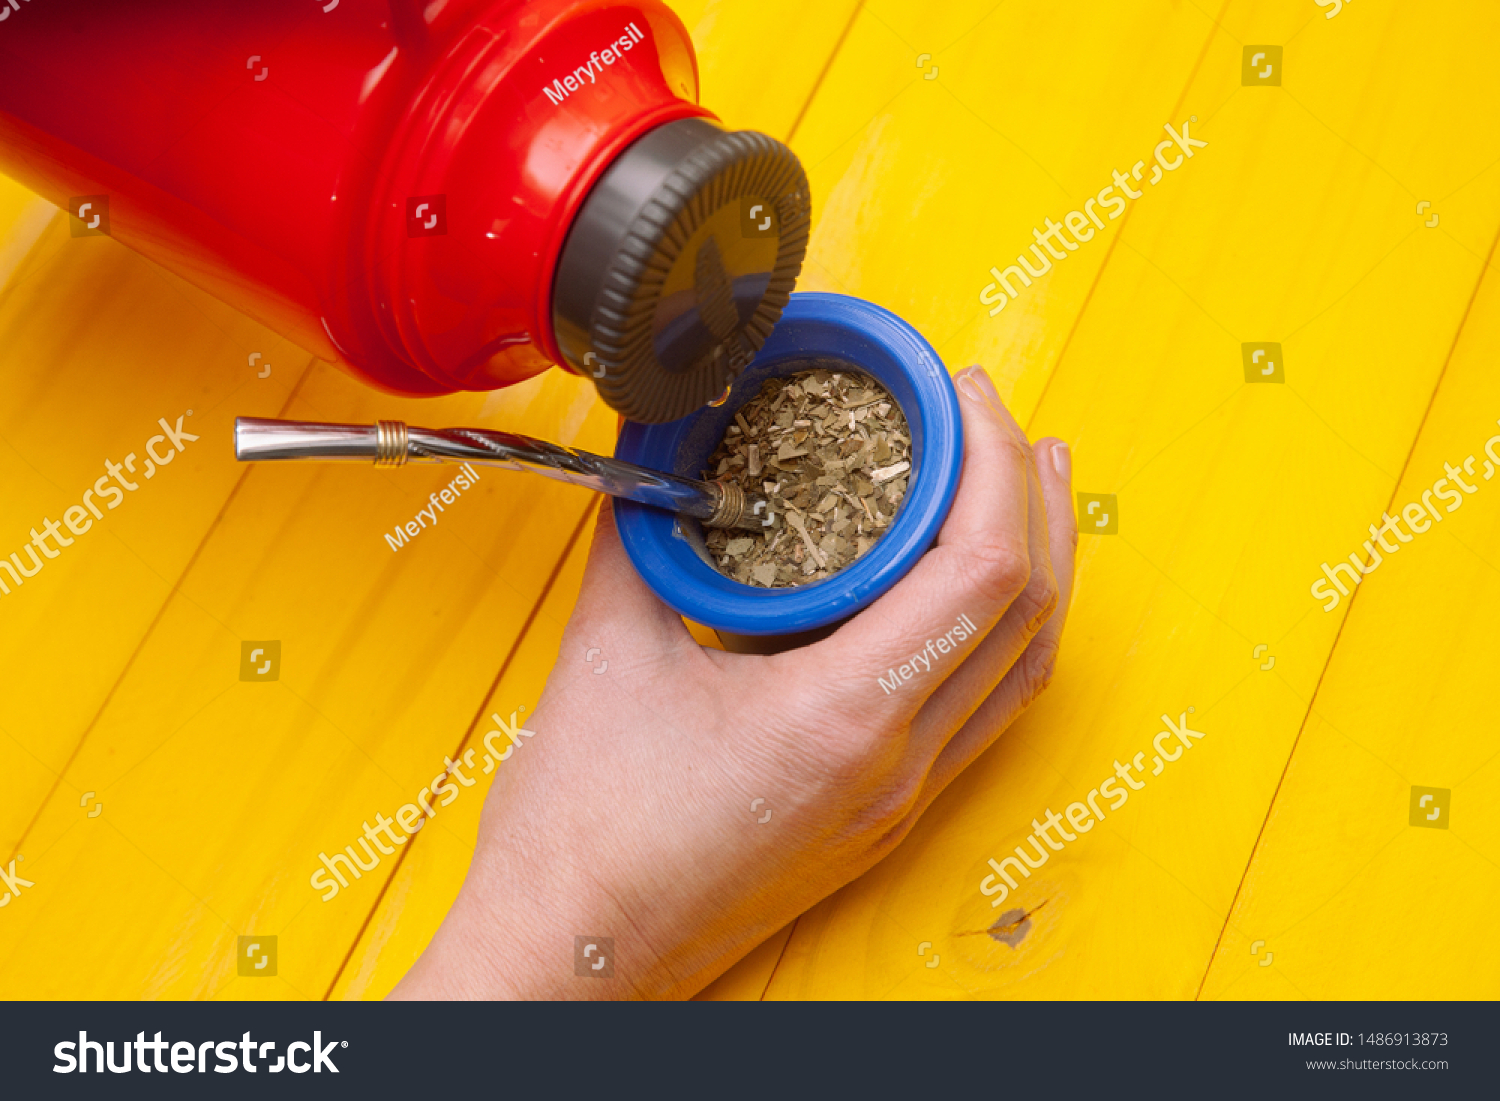 Download Blue Matte Red Thermos Yellow Wooden Stock Photo Edit Now 1486913873 PSD Mockup Templates